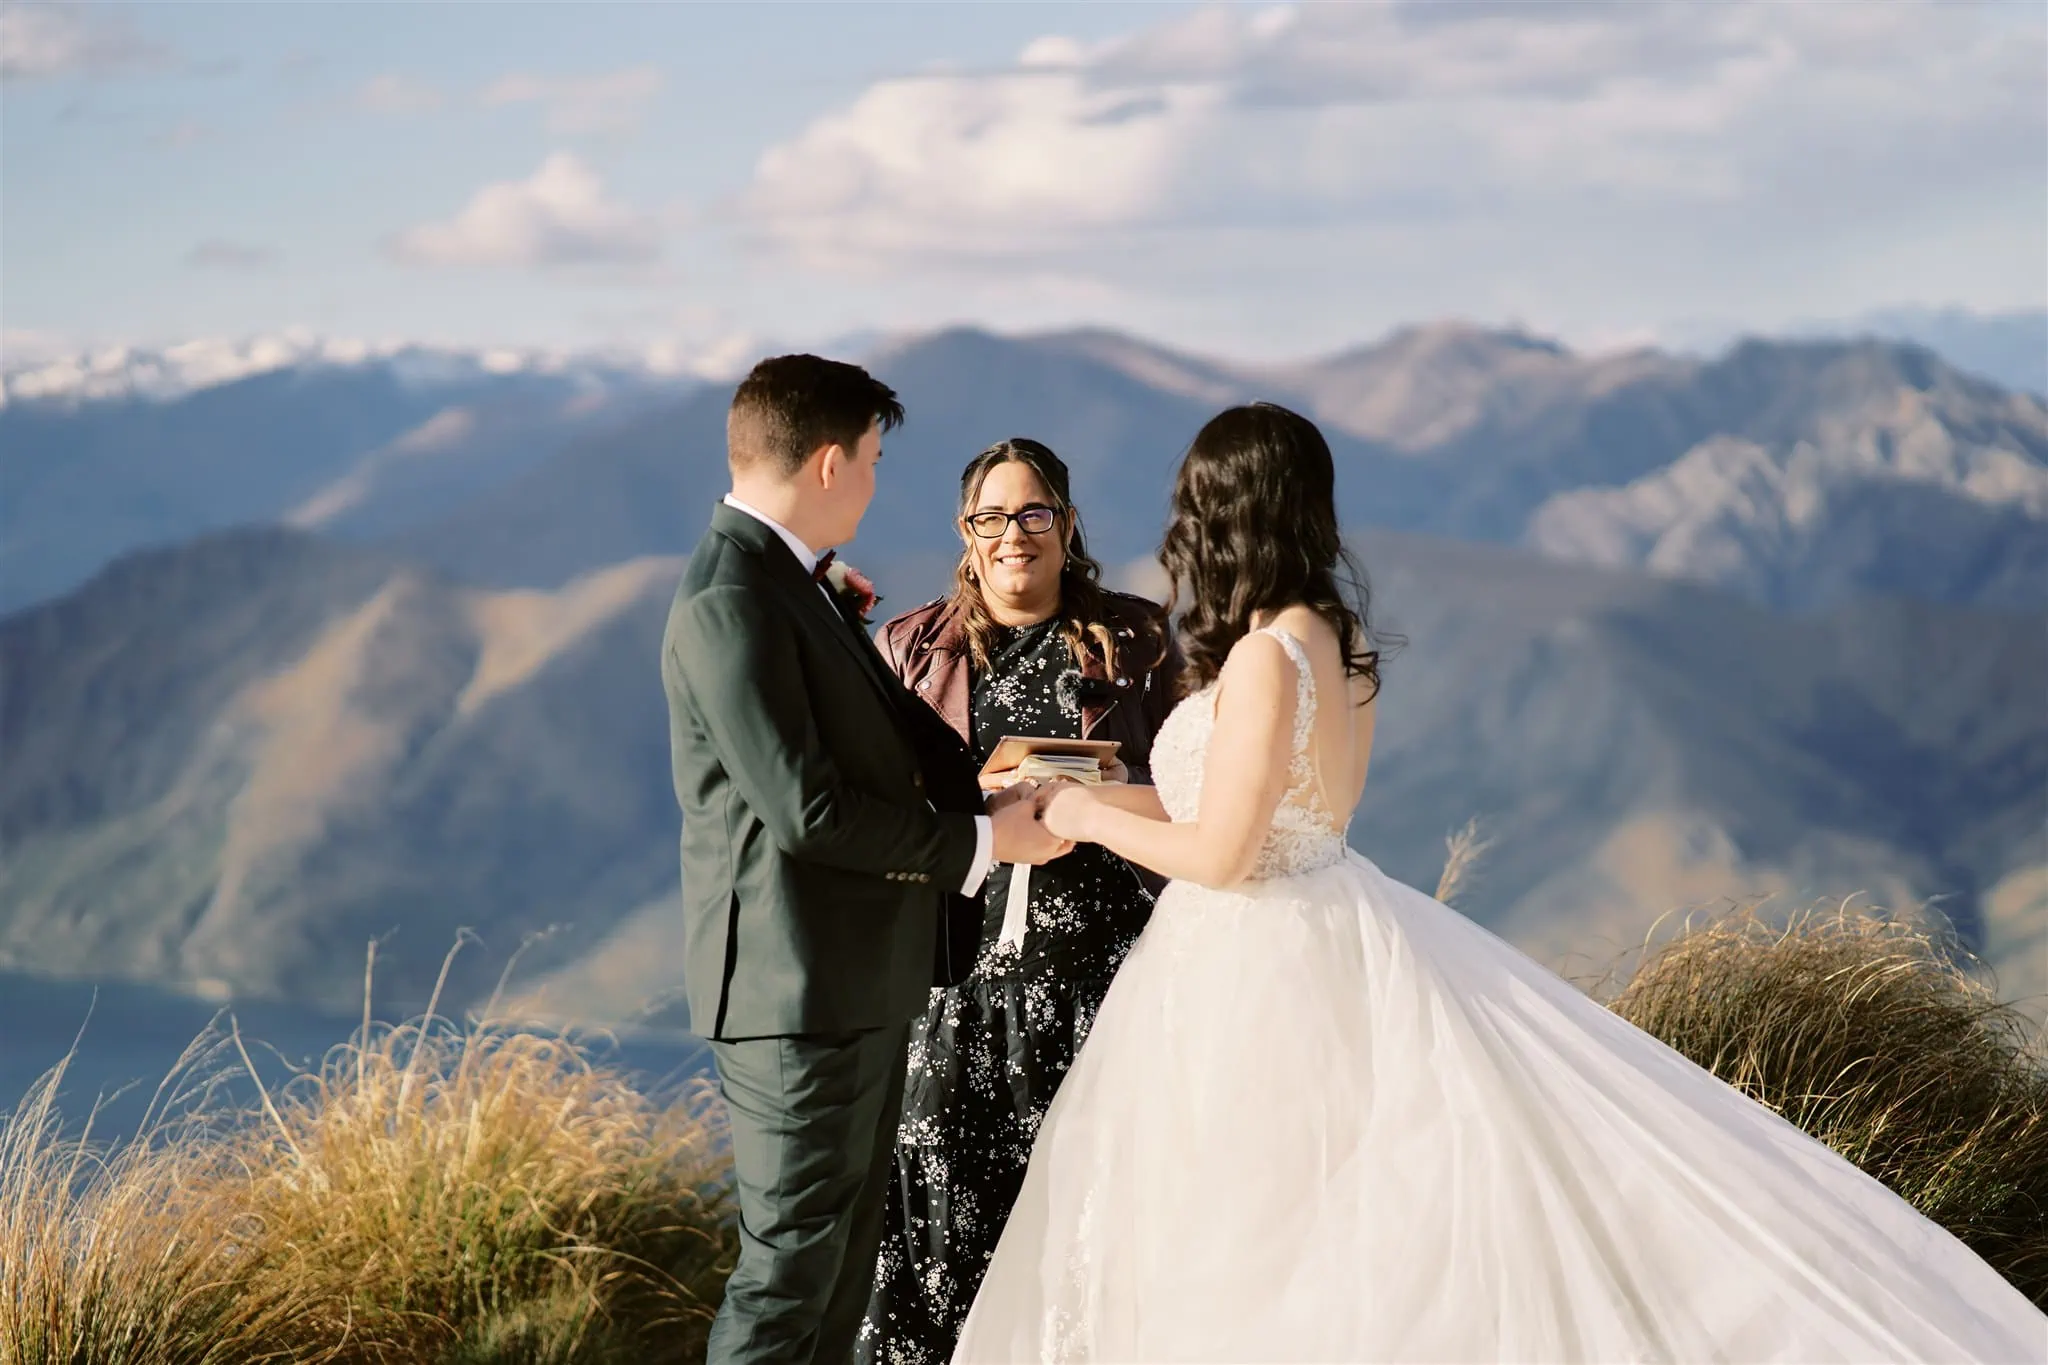 Queenstown Elopement Heli Wedding Photographer クイーンズタウン結婚式 | An intimate elopement wedding as a bride and groom exchange vows on top of a mountain in New Zealand.